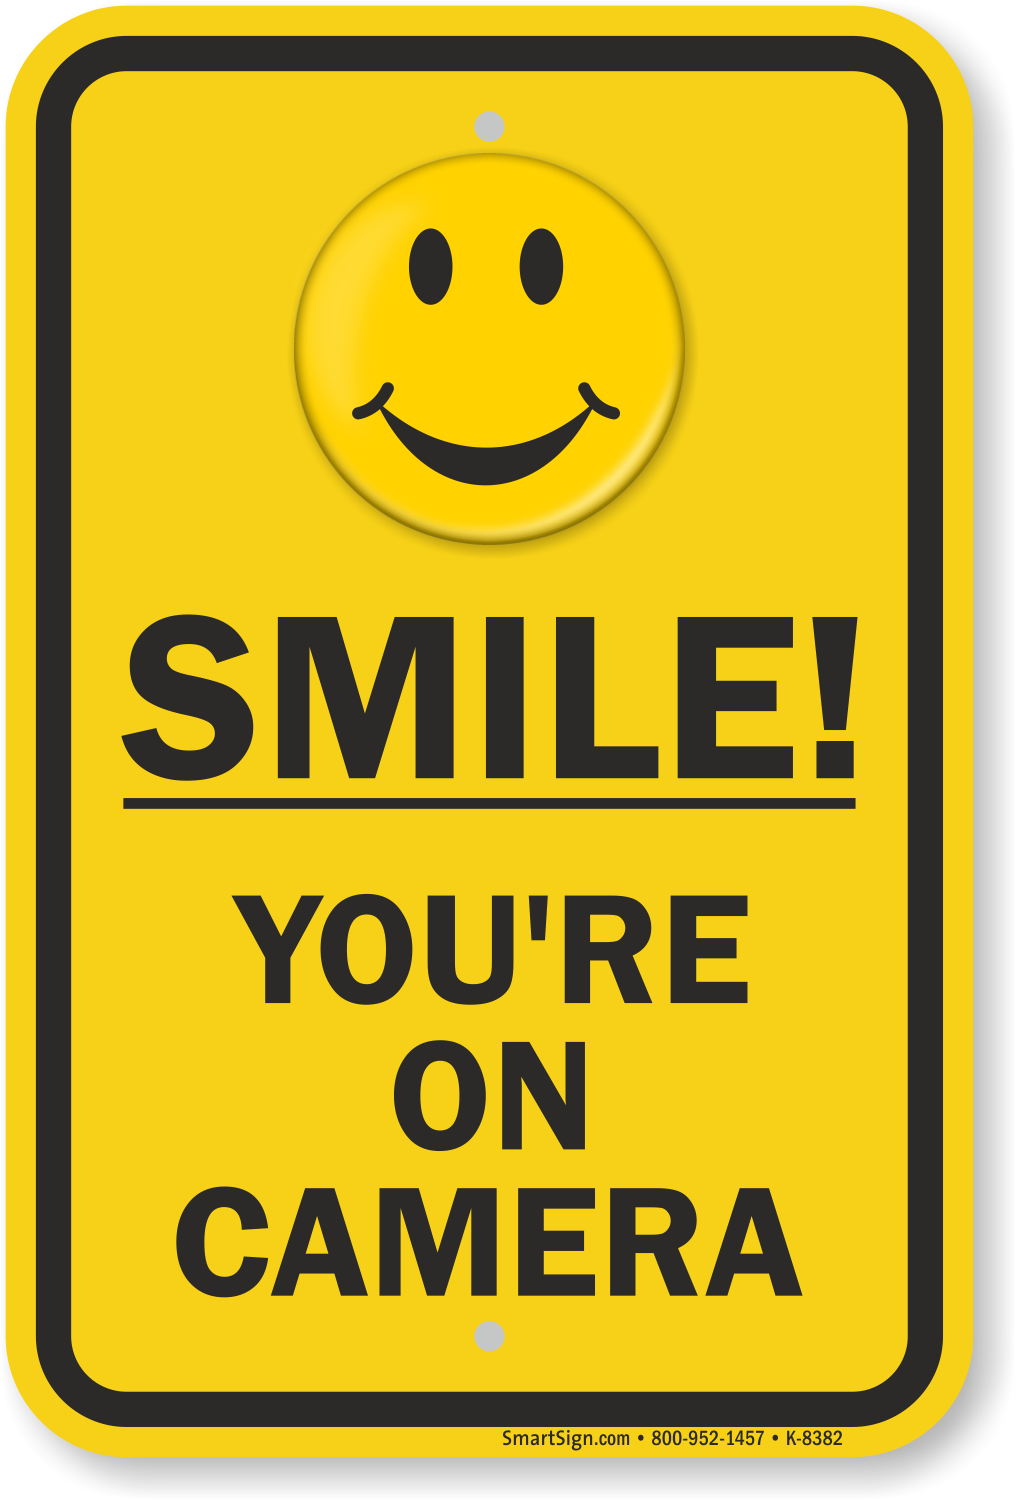 Yellow Smile You're on Camera Sign, SKU K8382